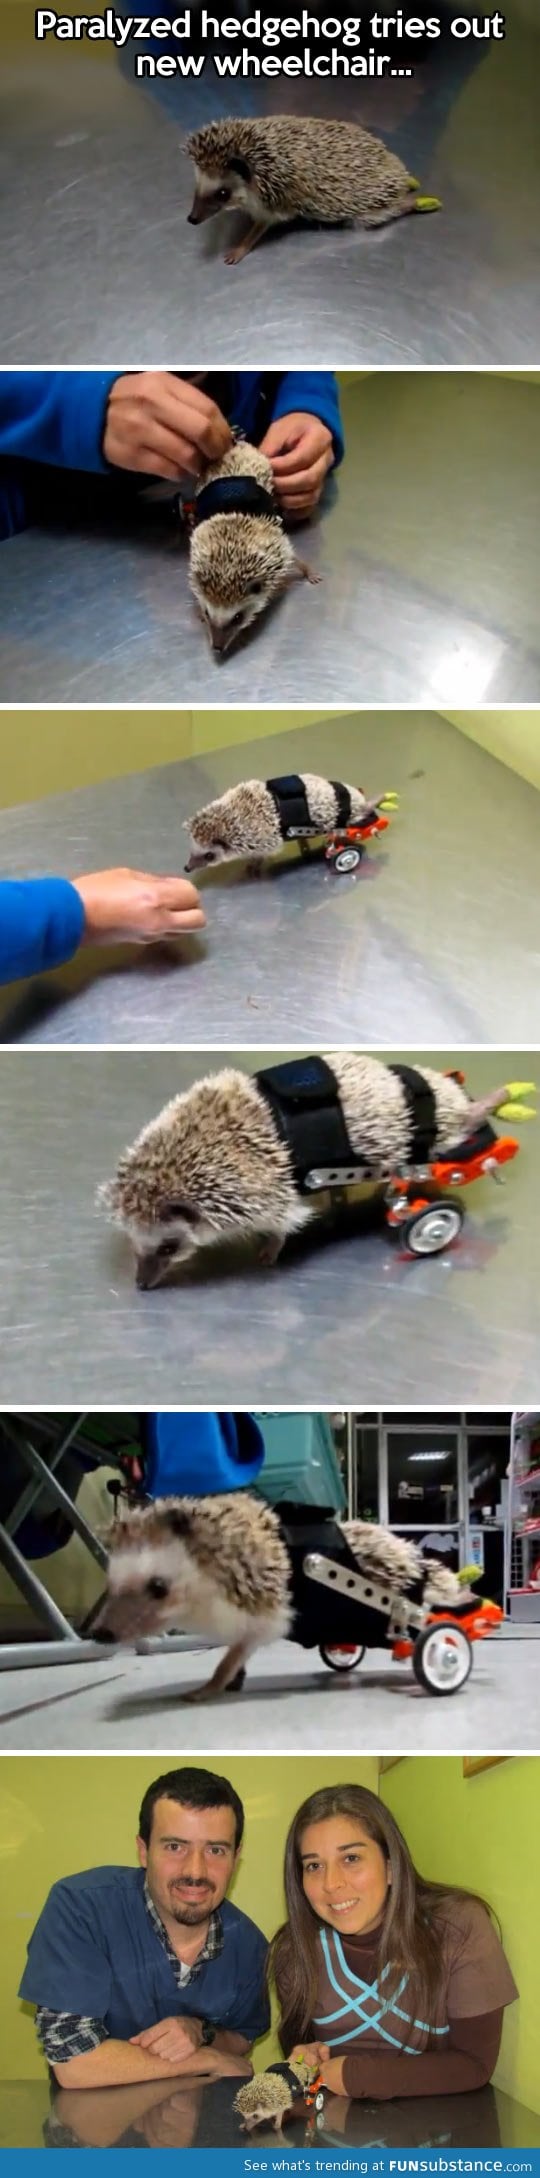 Paralyzed hedgehog fitted with wheels